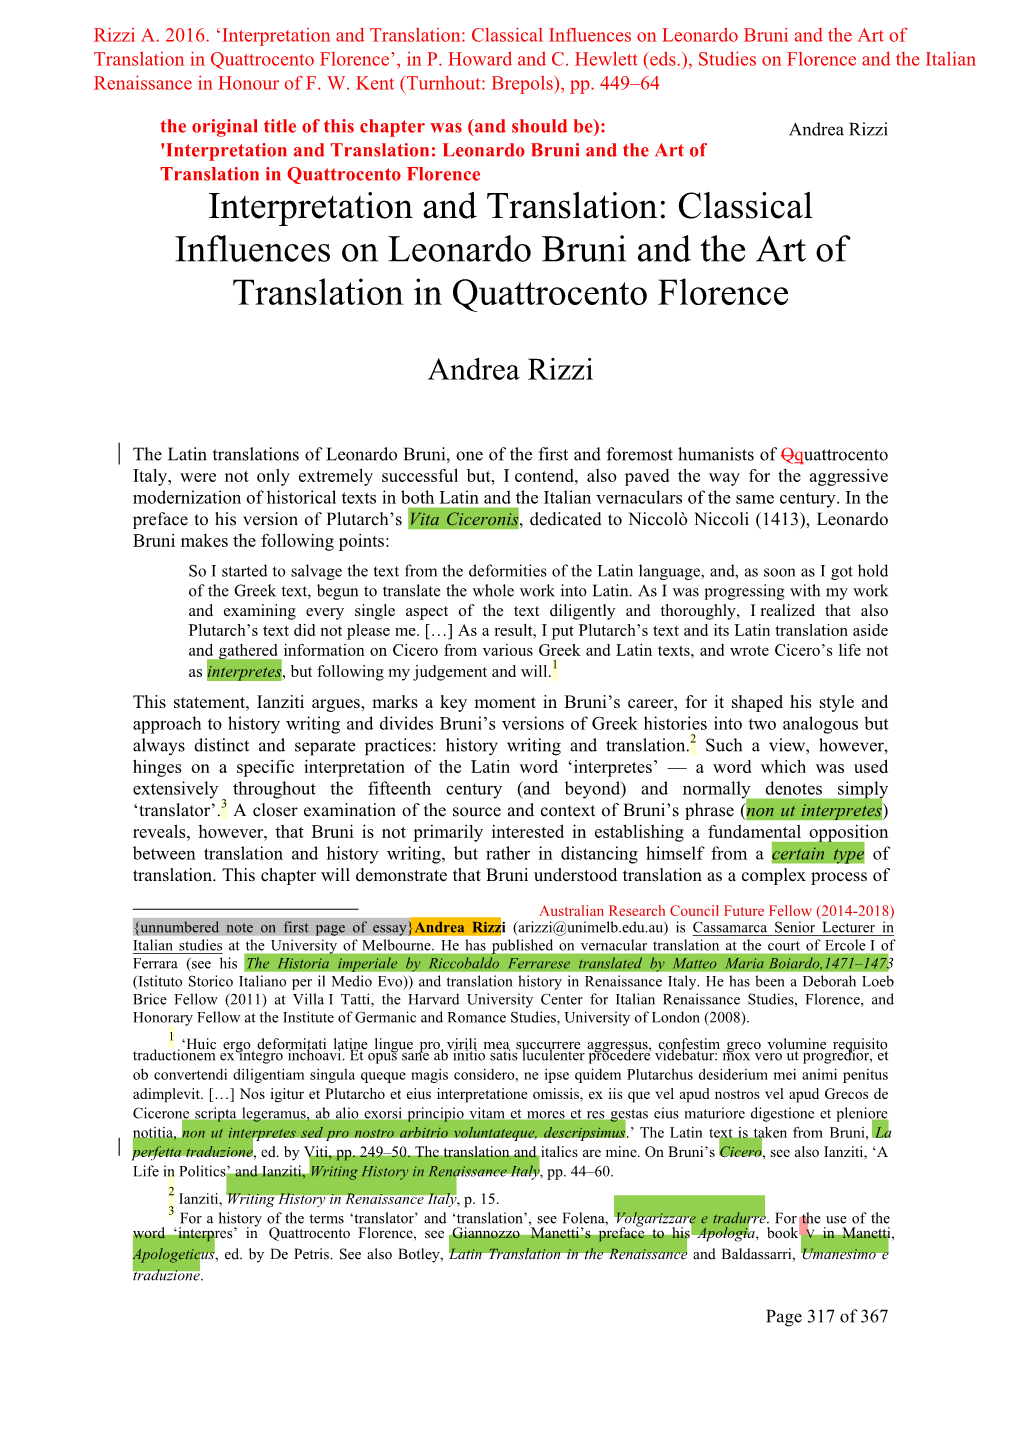 Classical Influences on Leonardo Bruni and the Art of Translation in Quattrocento Florence’, in P